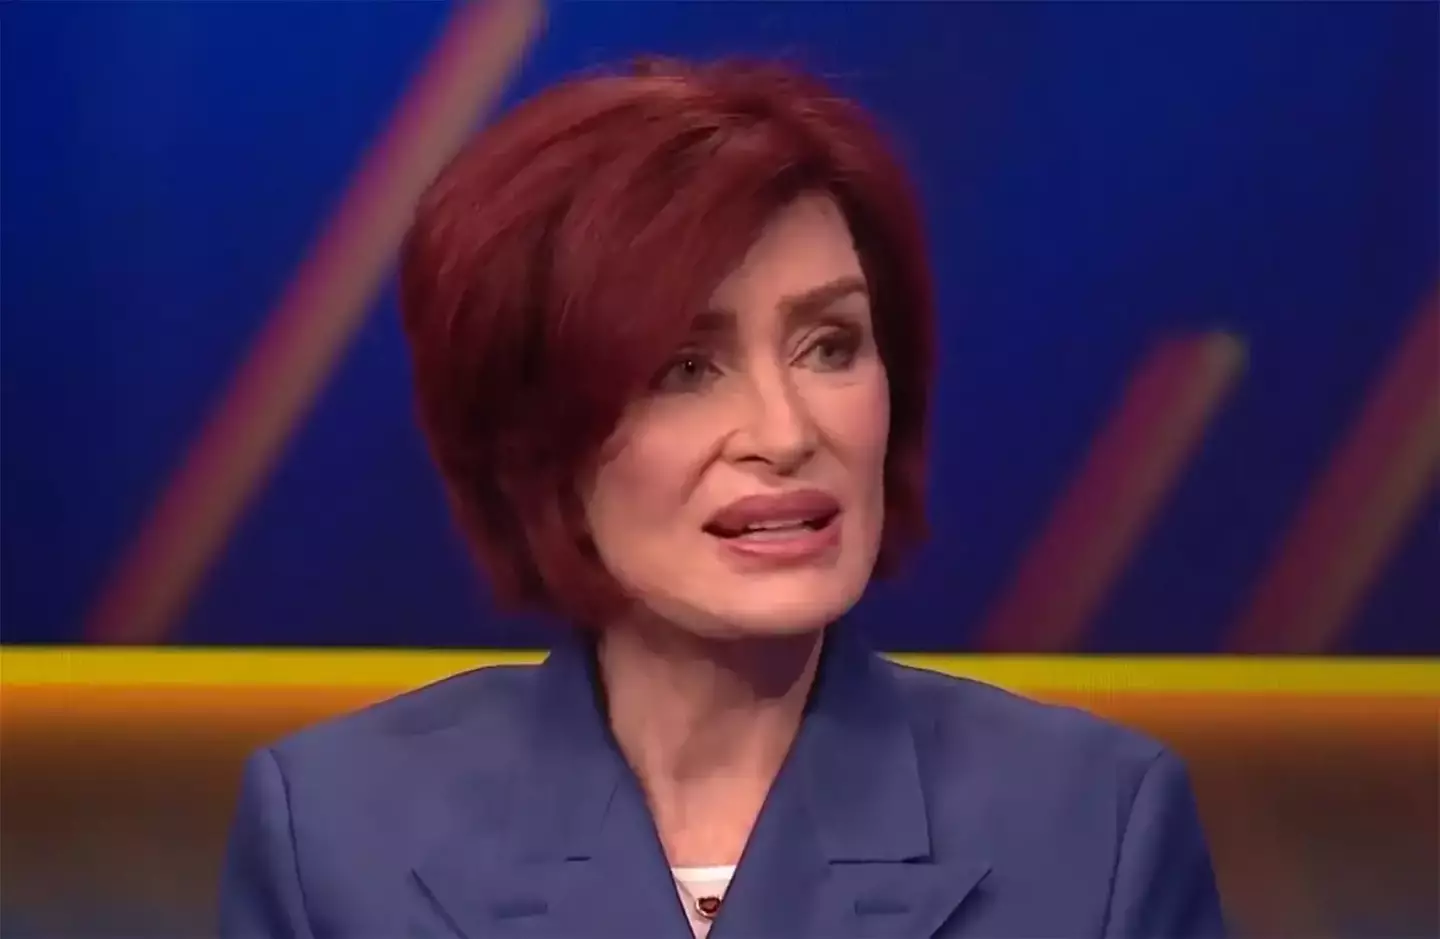 Sharon Osbourne says that injecting weight loss drugs left her with serious side effects.